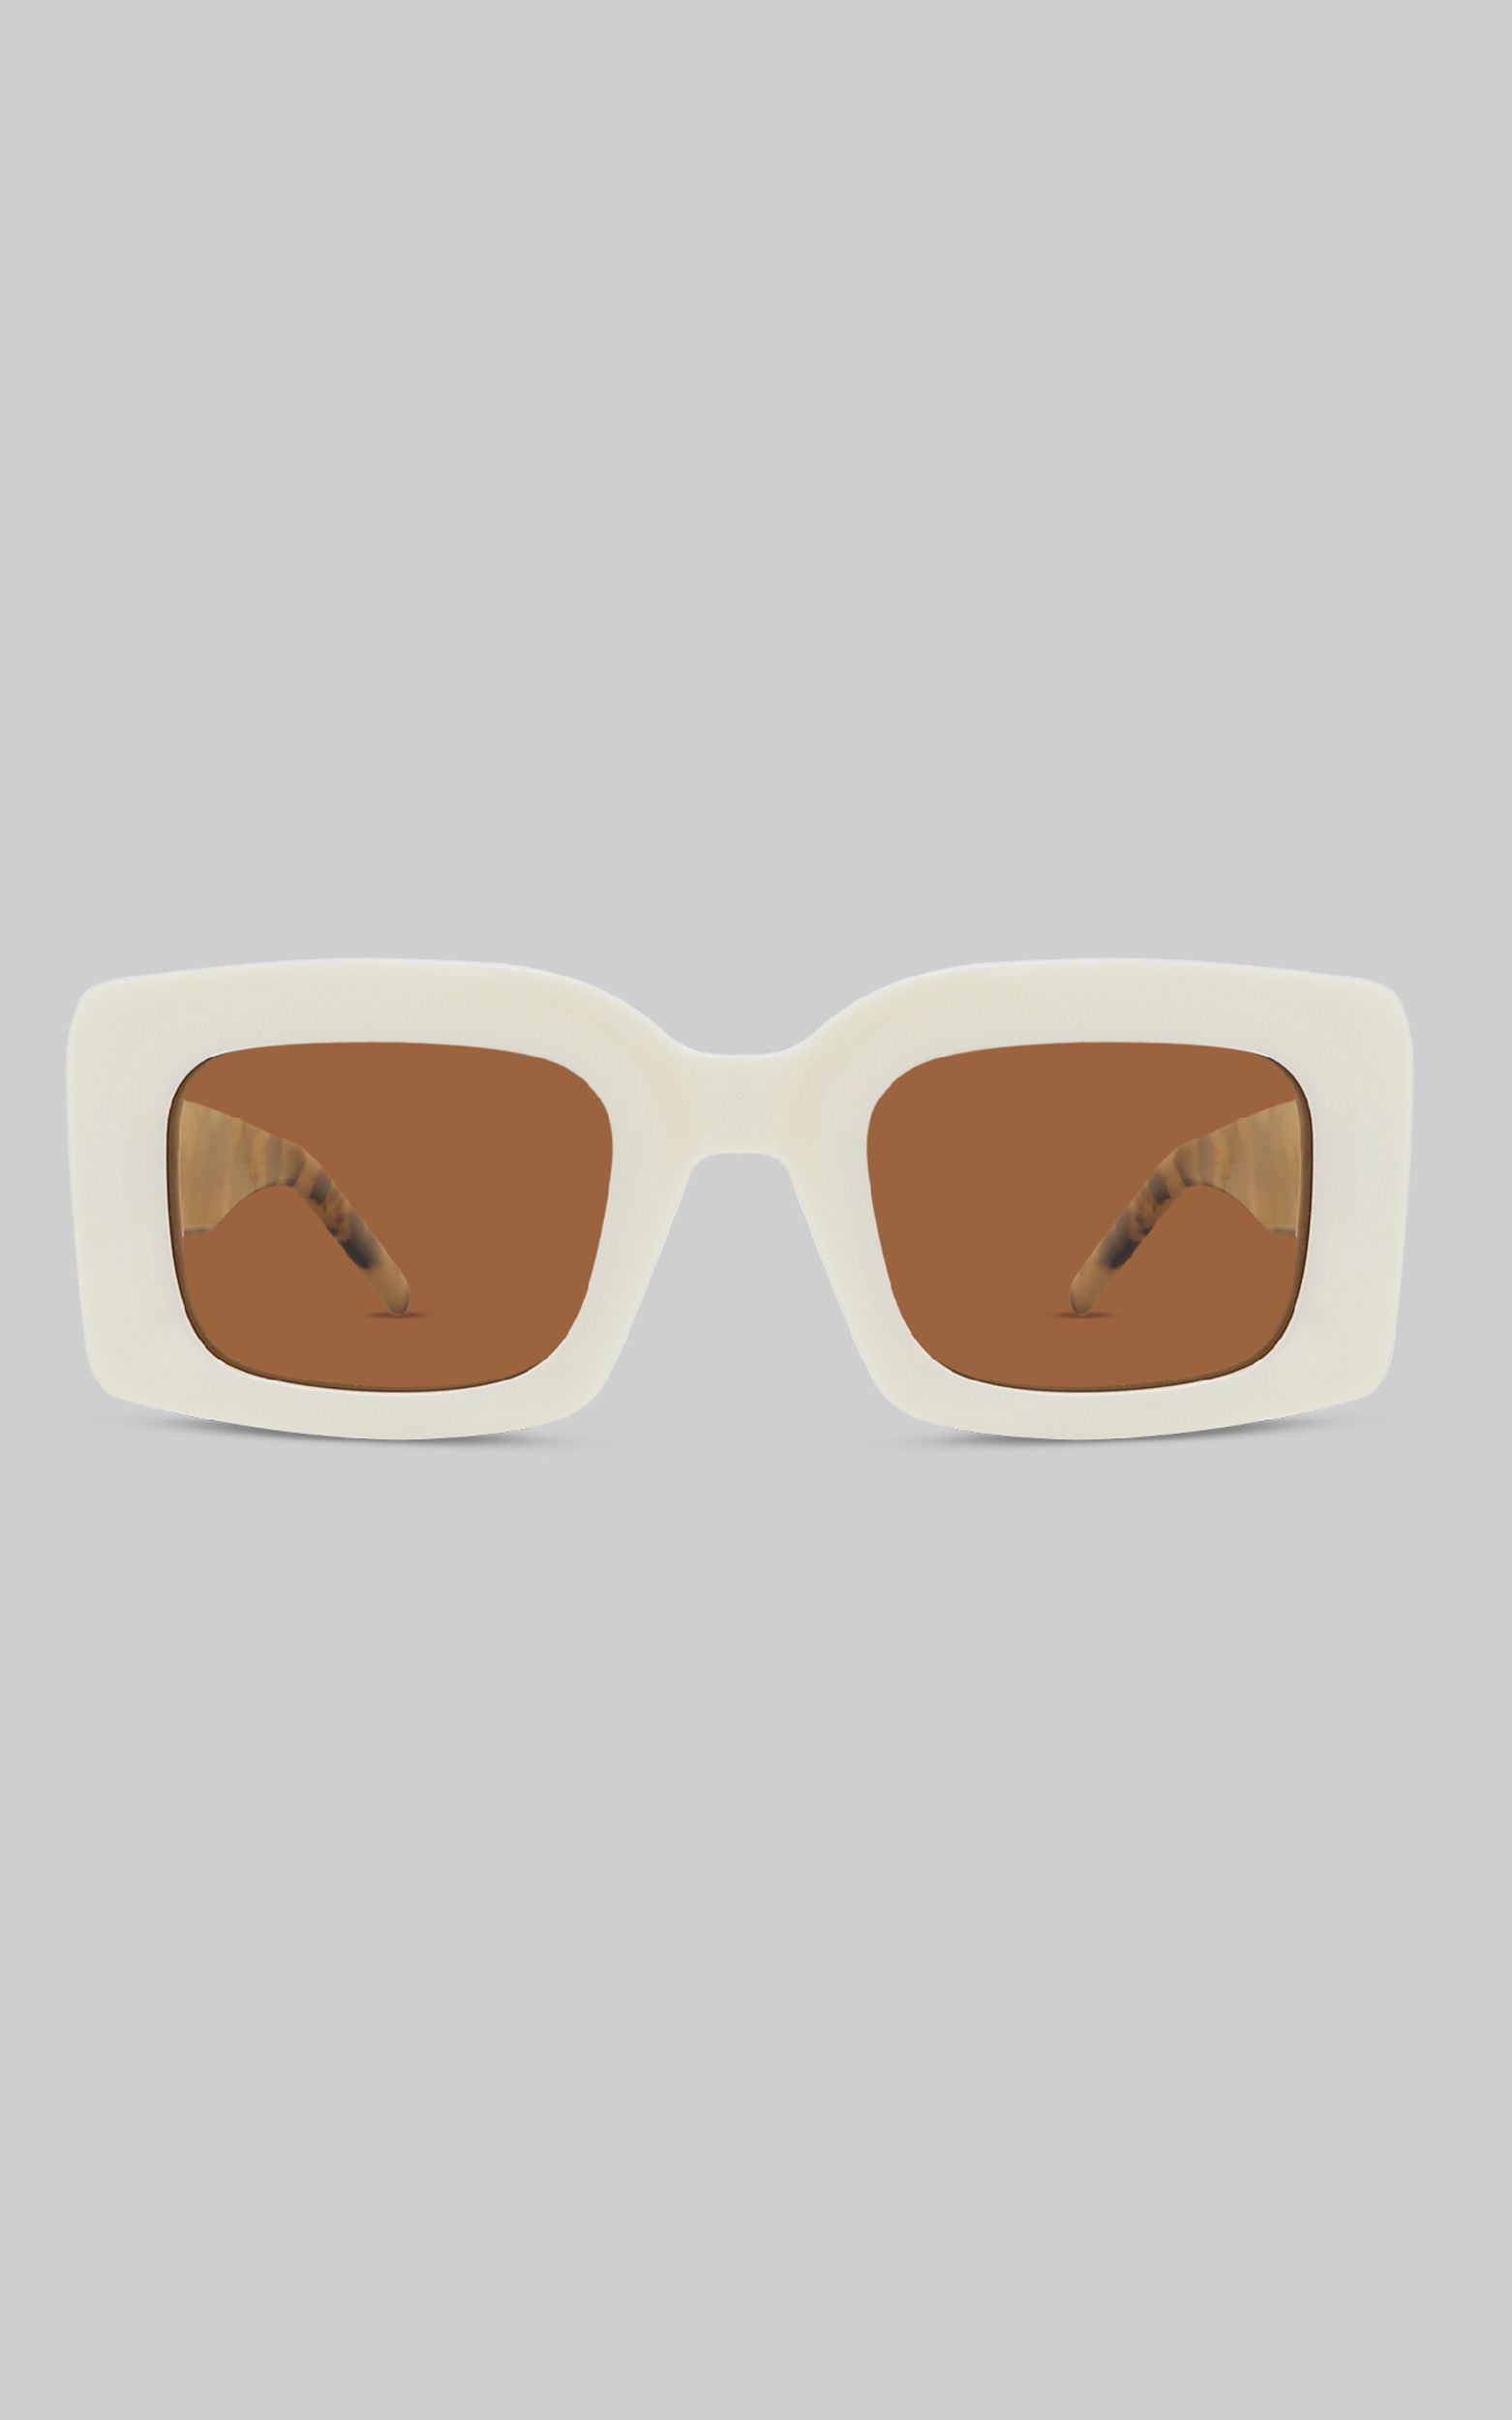 BANBE EYEWEAR - THE KENDALL in IVORY & BLONDE TORT-BROWN | Showpo - deactived